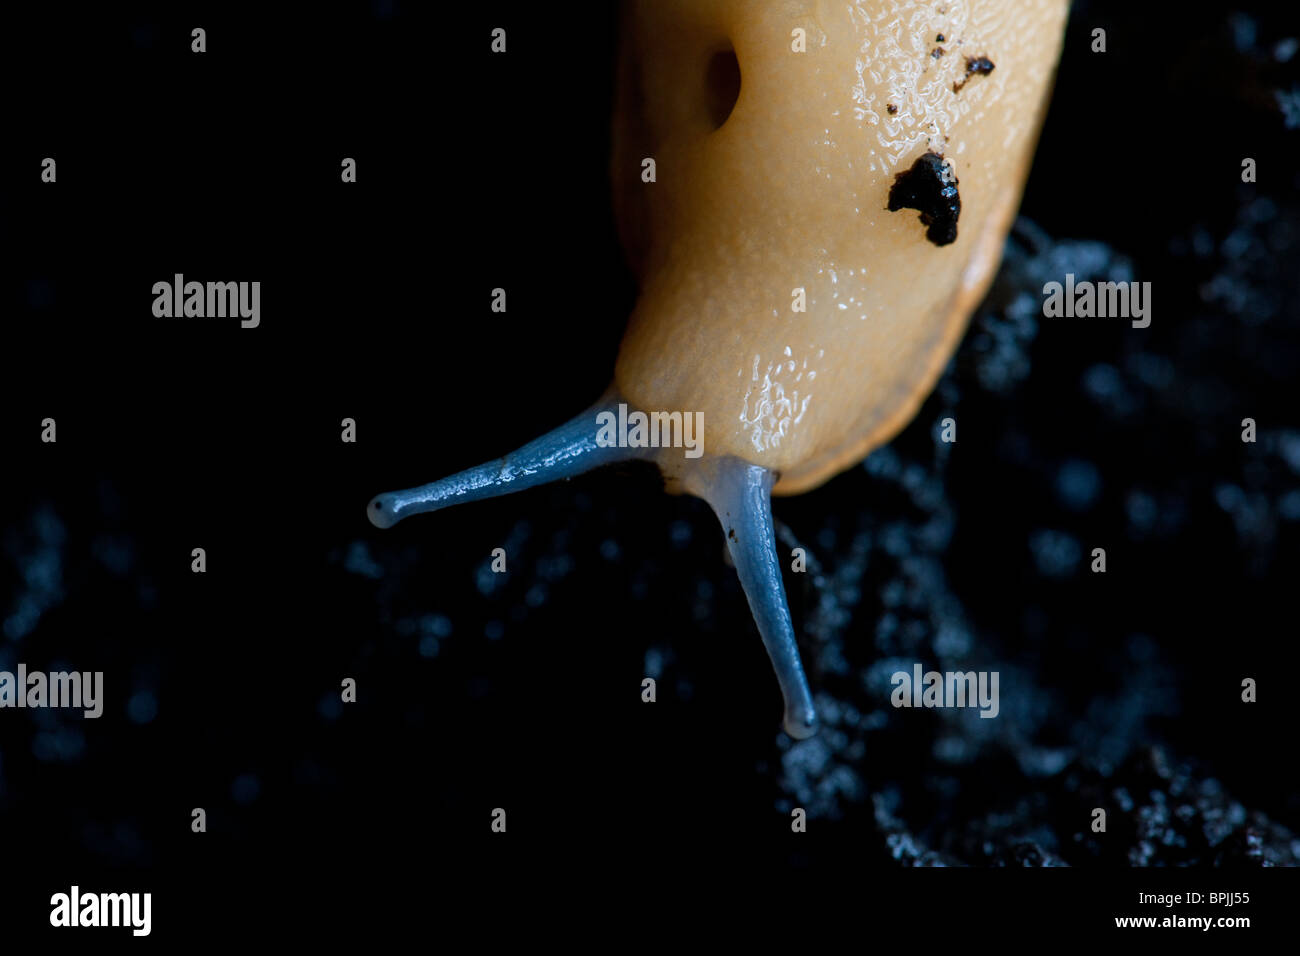 A white slug showing the breathing hole, called the pneumostome, and the optical and sensory tentacles Stock Photo